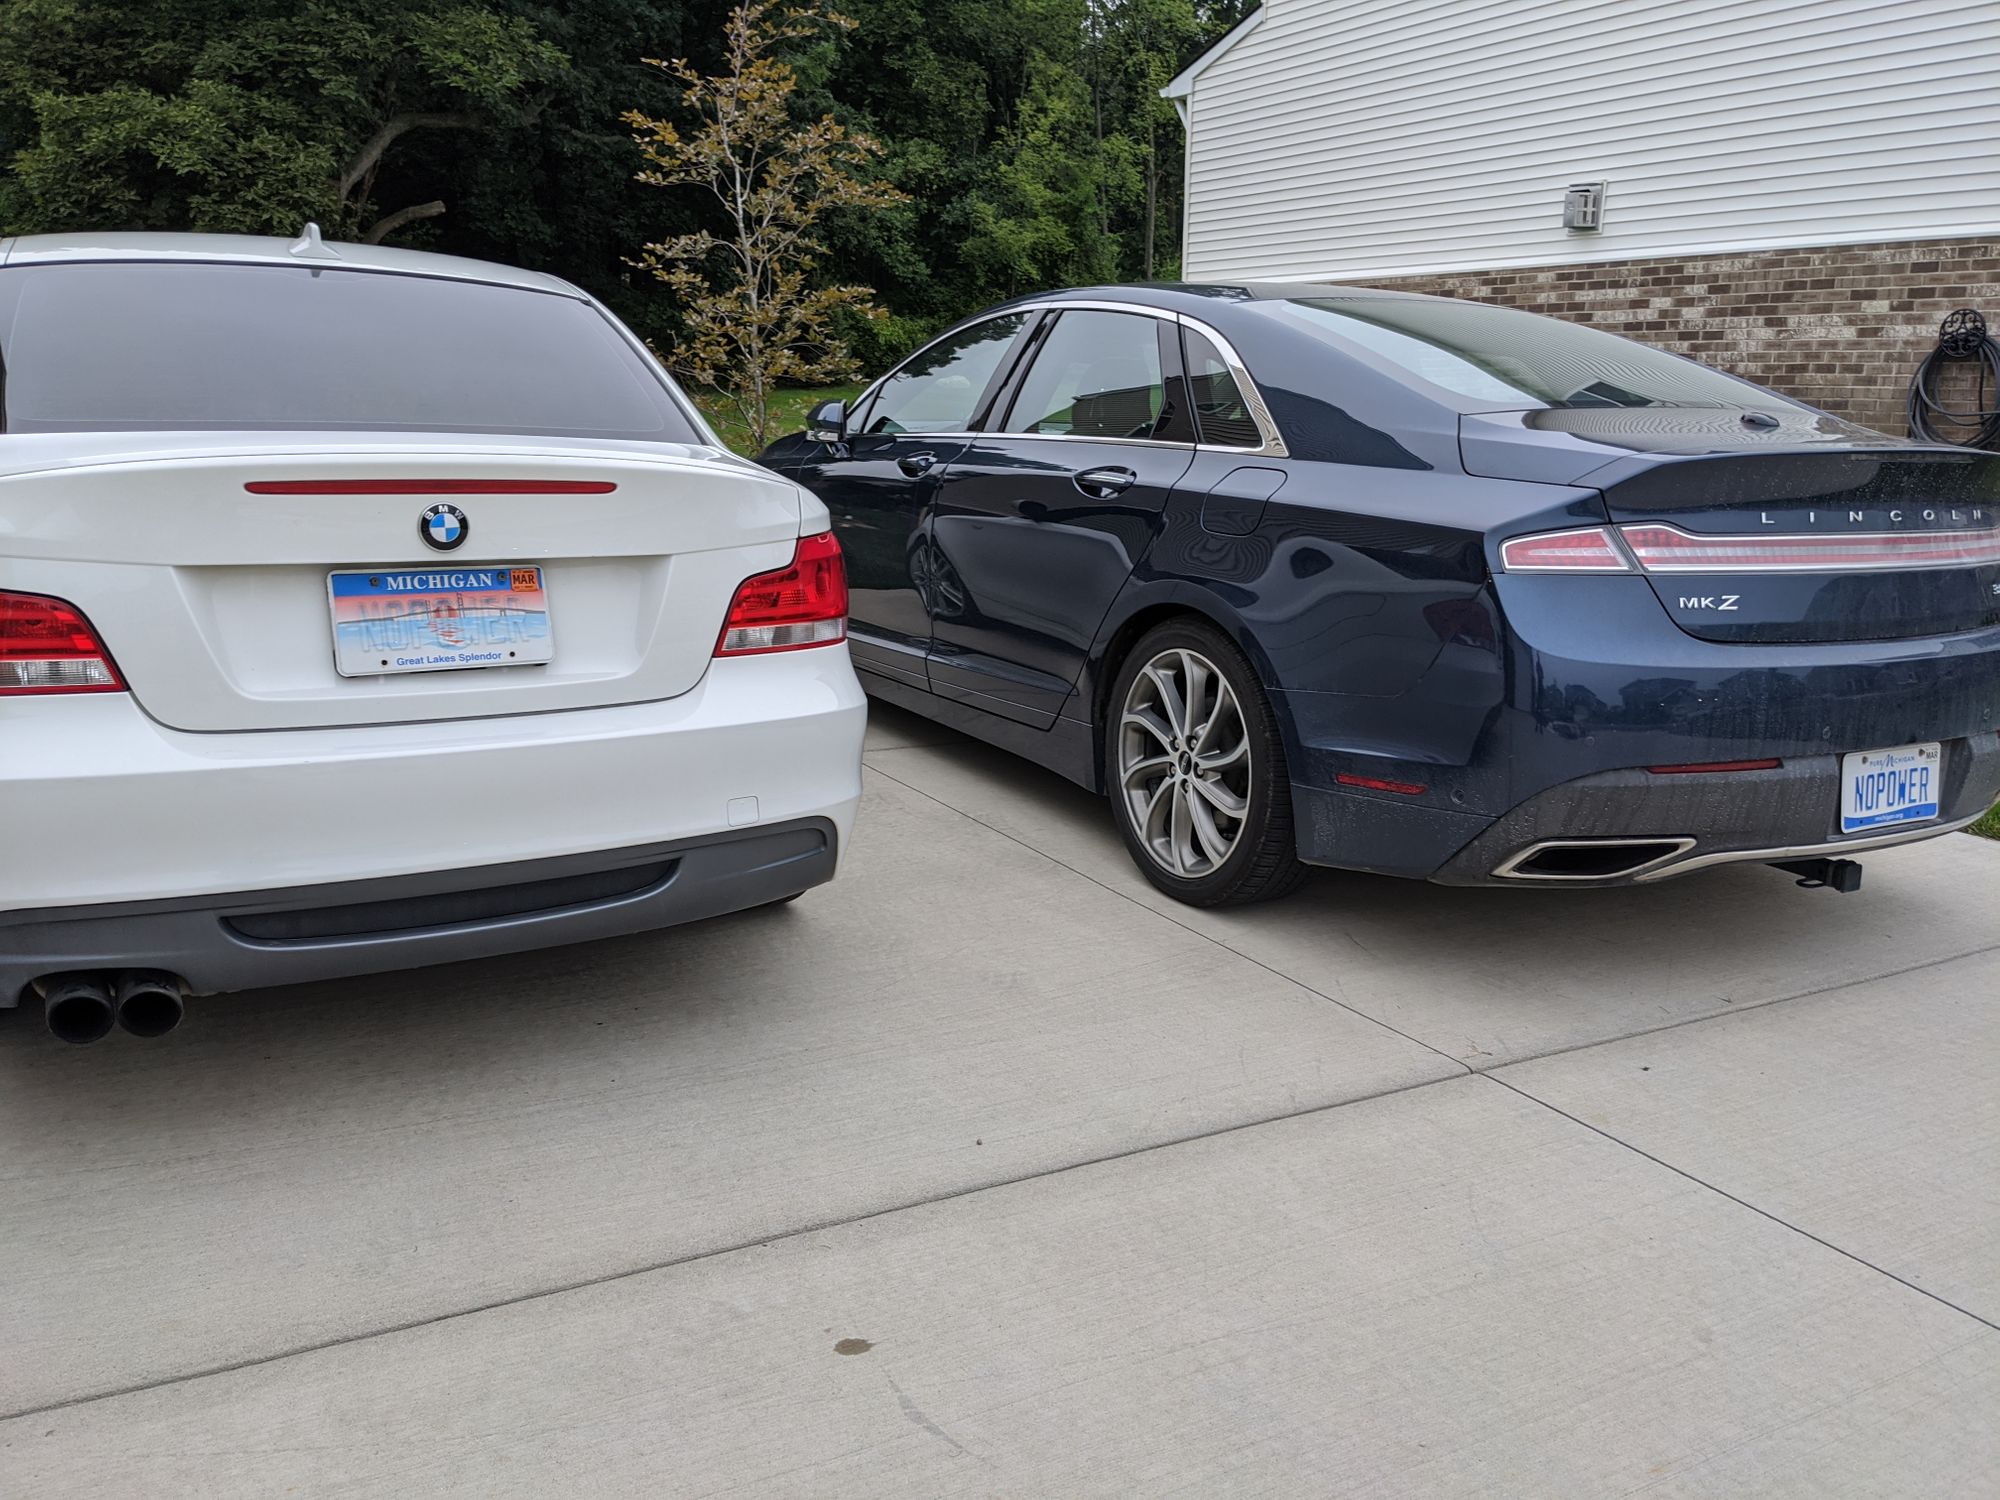 Uh, now I have two NOPOWER cars. Time for a new plate for the MKZ.